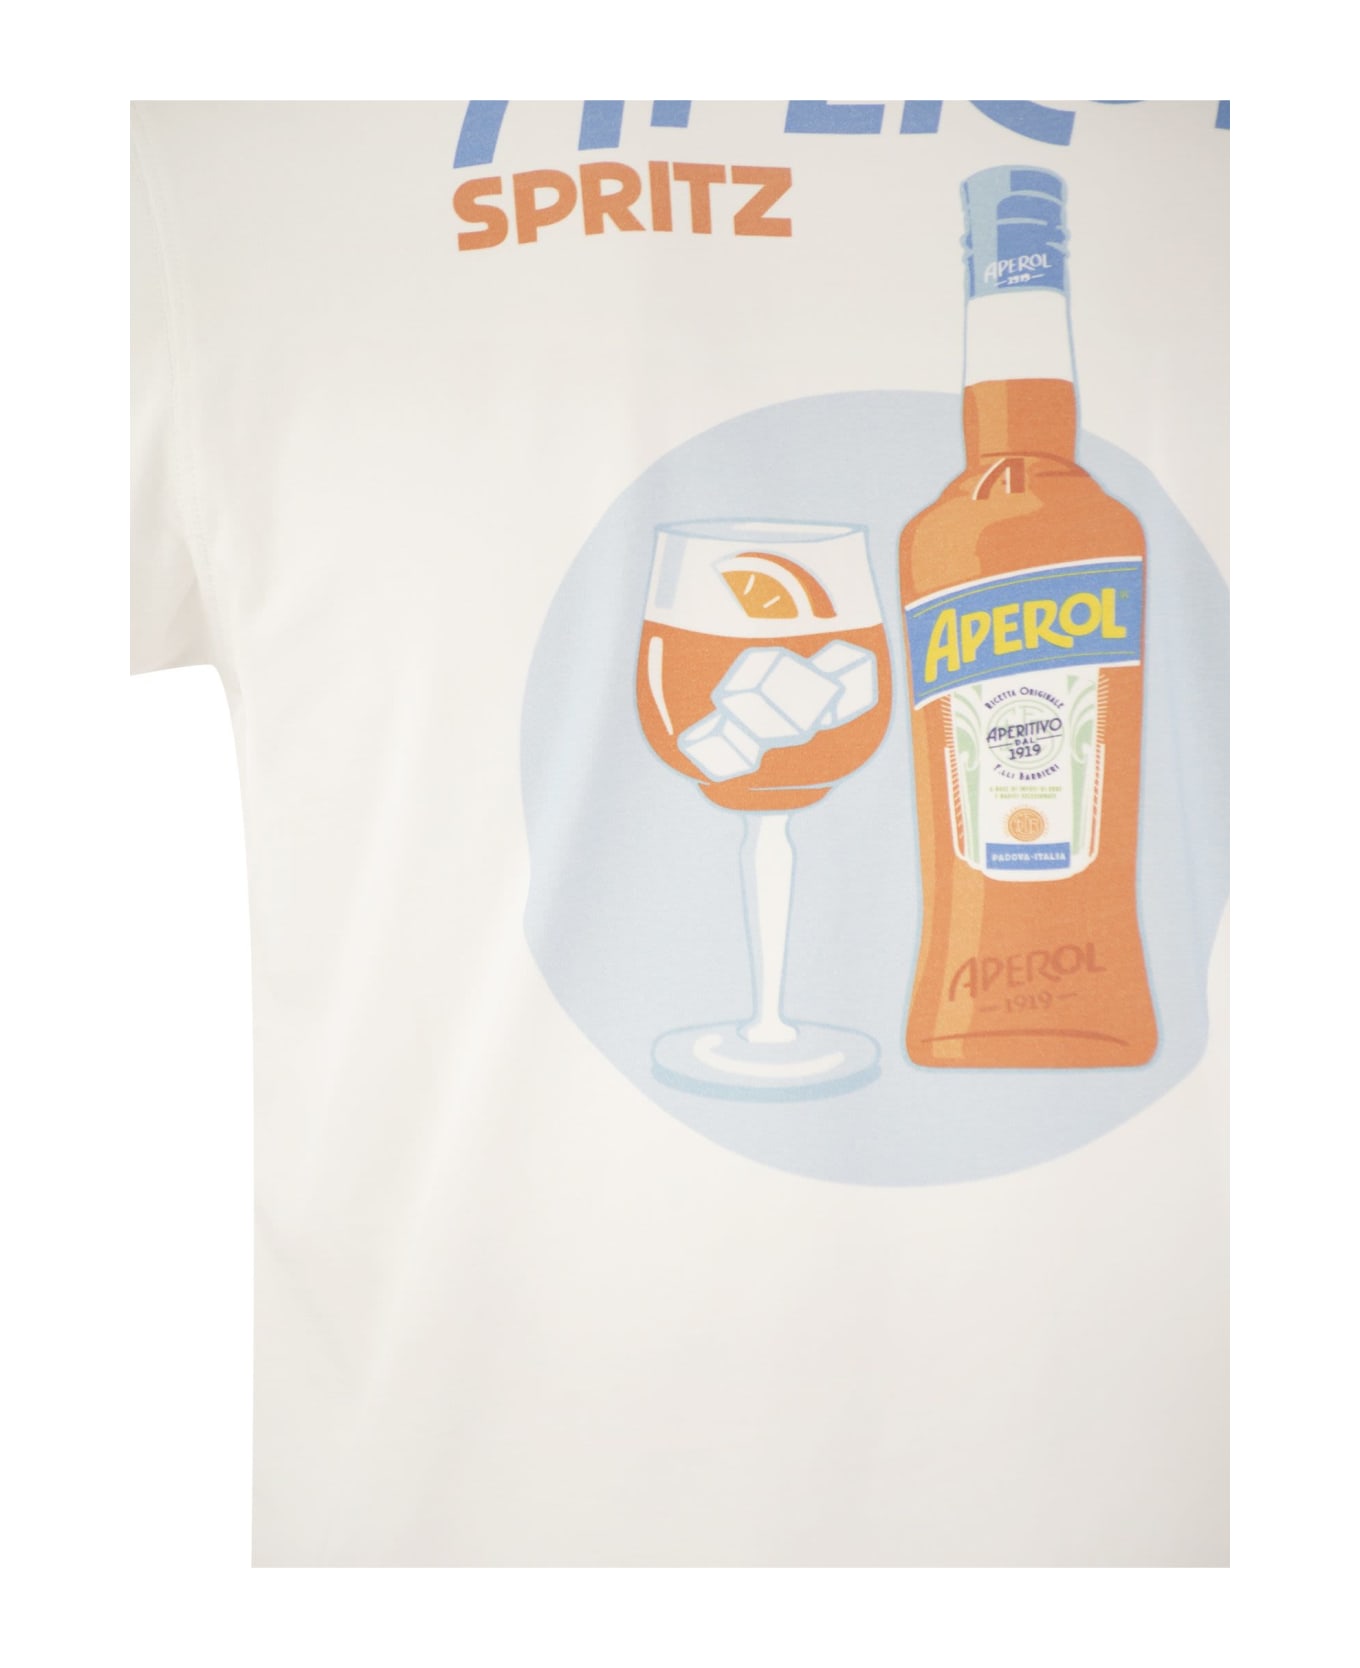 MC2 Saint Barth T-shirt With Print On Chest And Back Aperol Special Edition - White